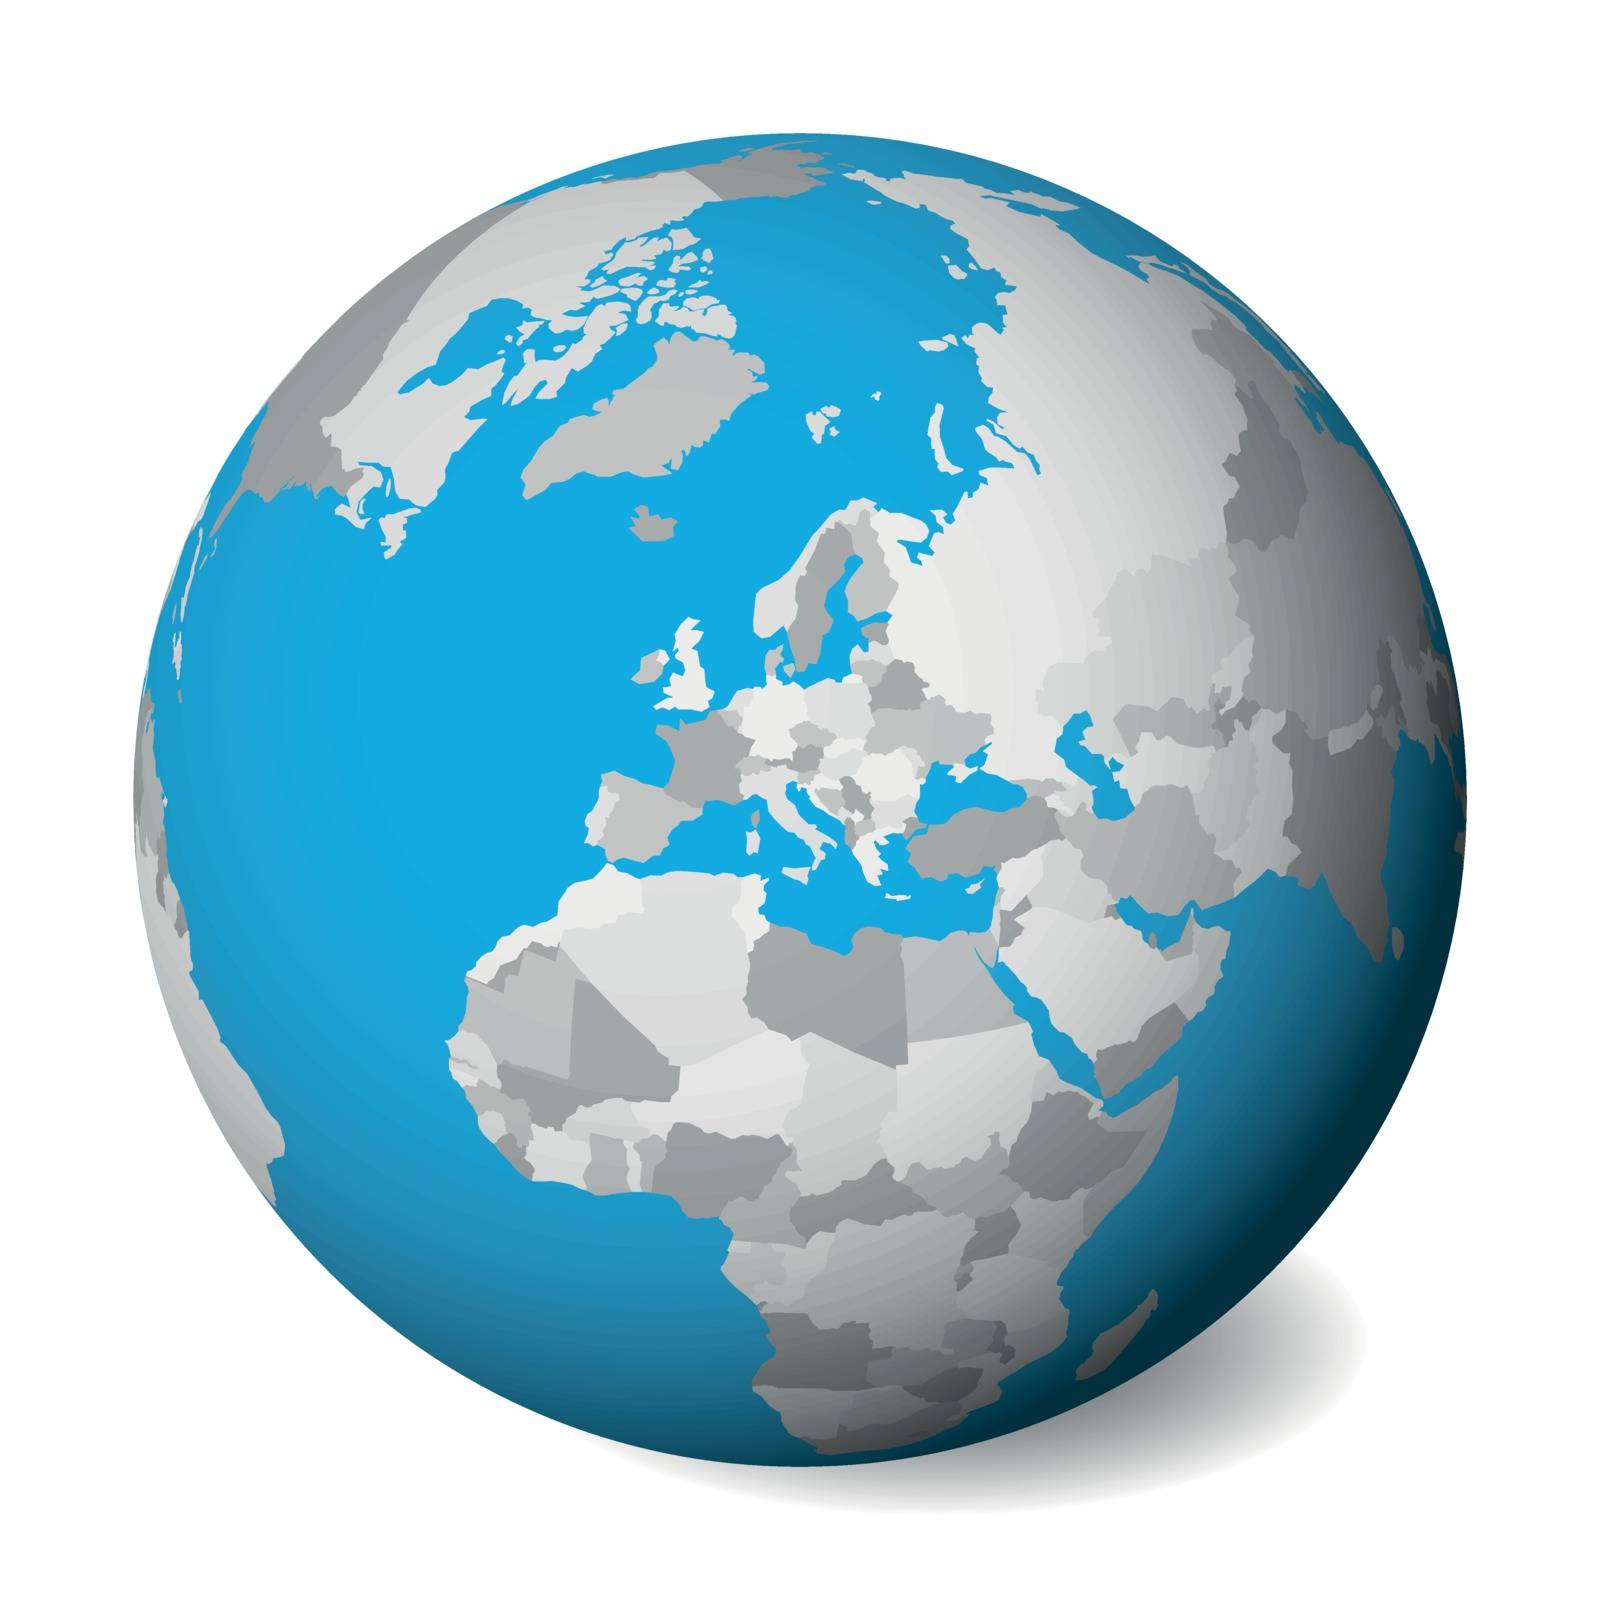 Blank political map of Europe. 3D Earth globe with blue water and grey lands. Vector illustration.